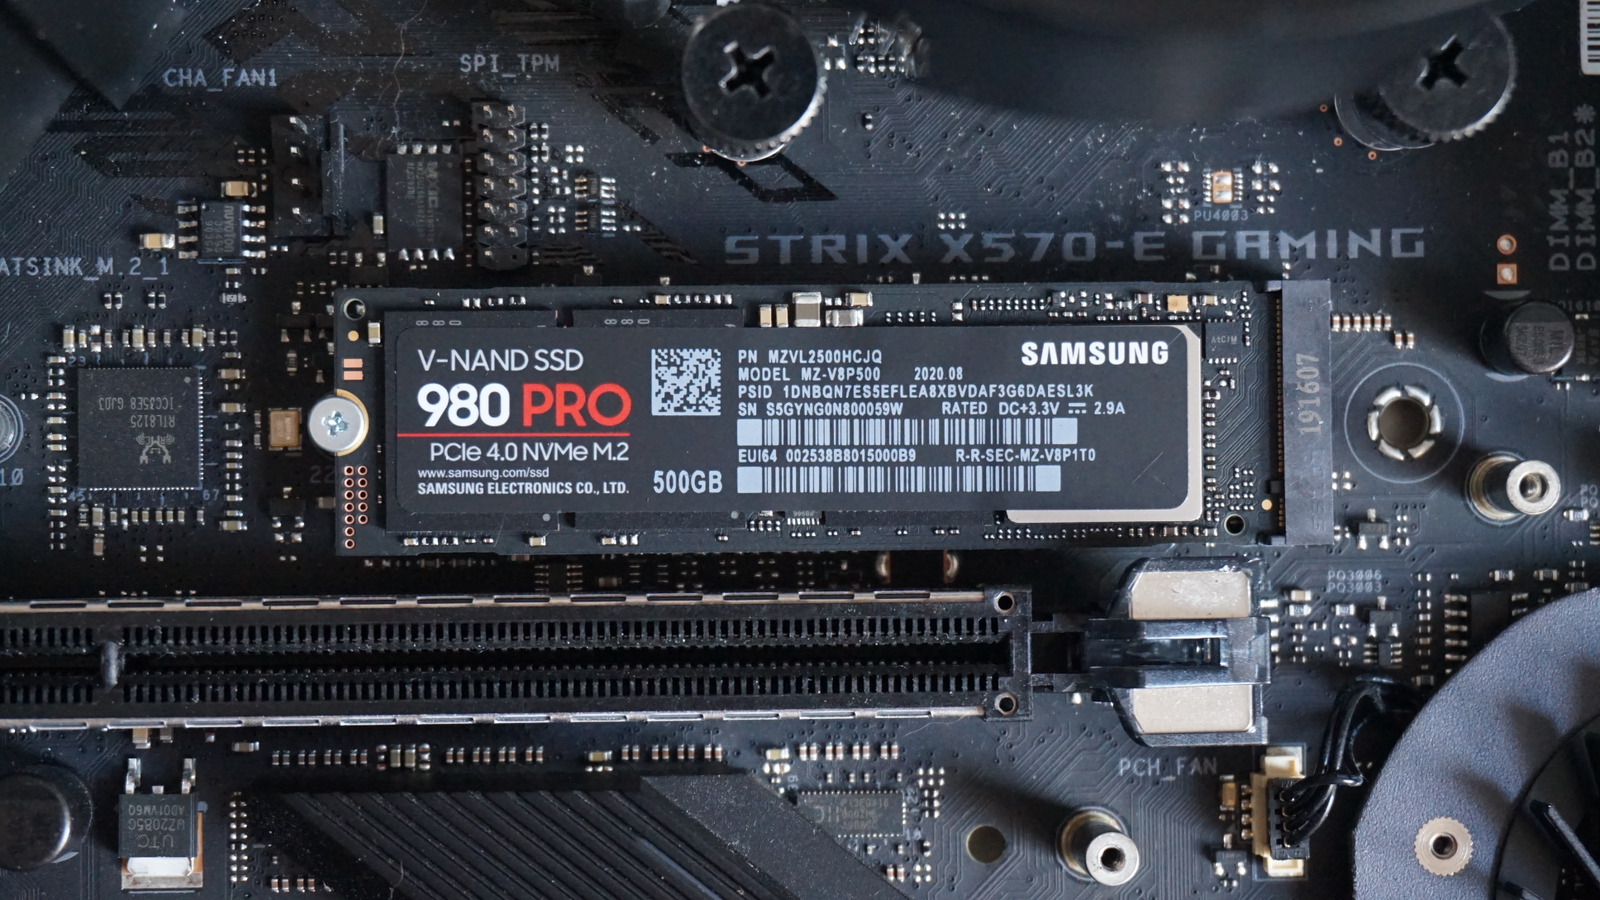 The Cool Samsung 980 PRO with Heatsink Is Here!